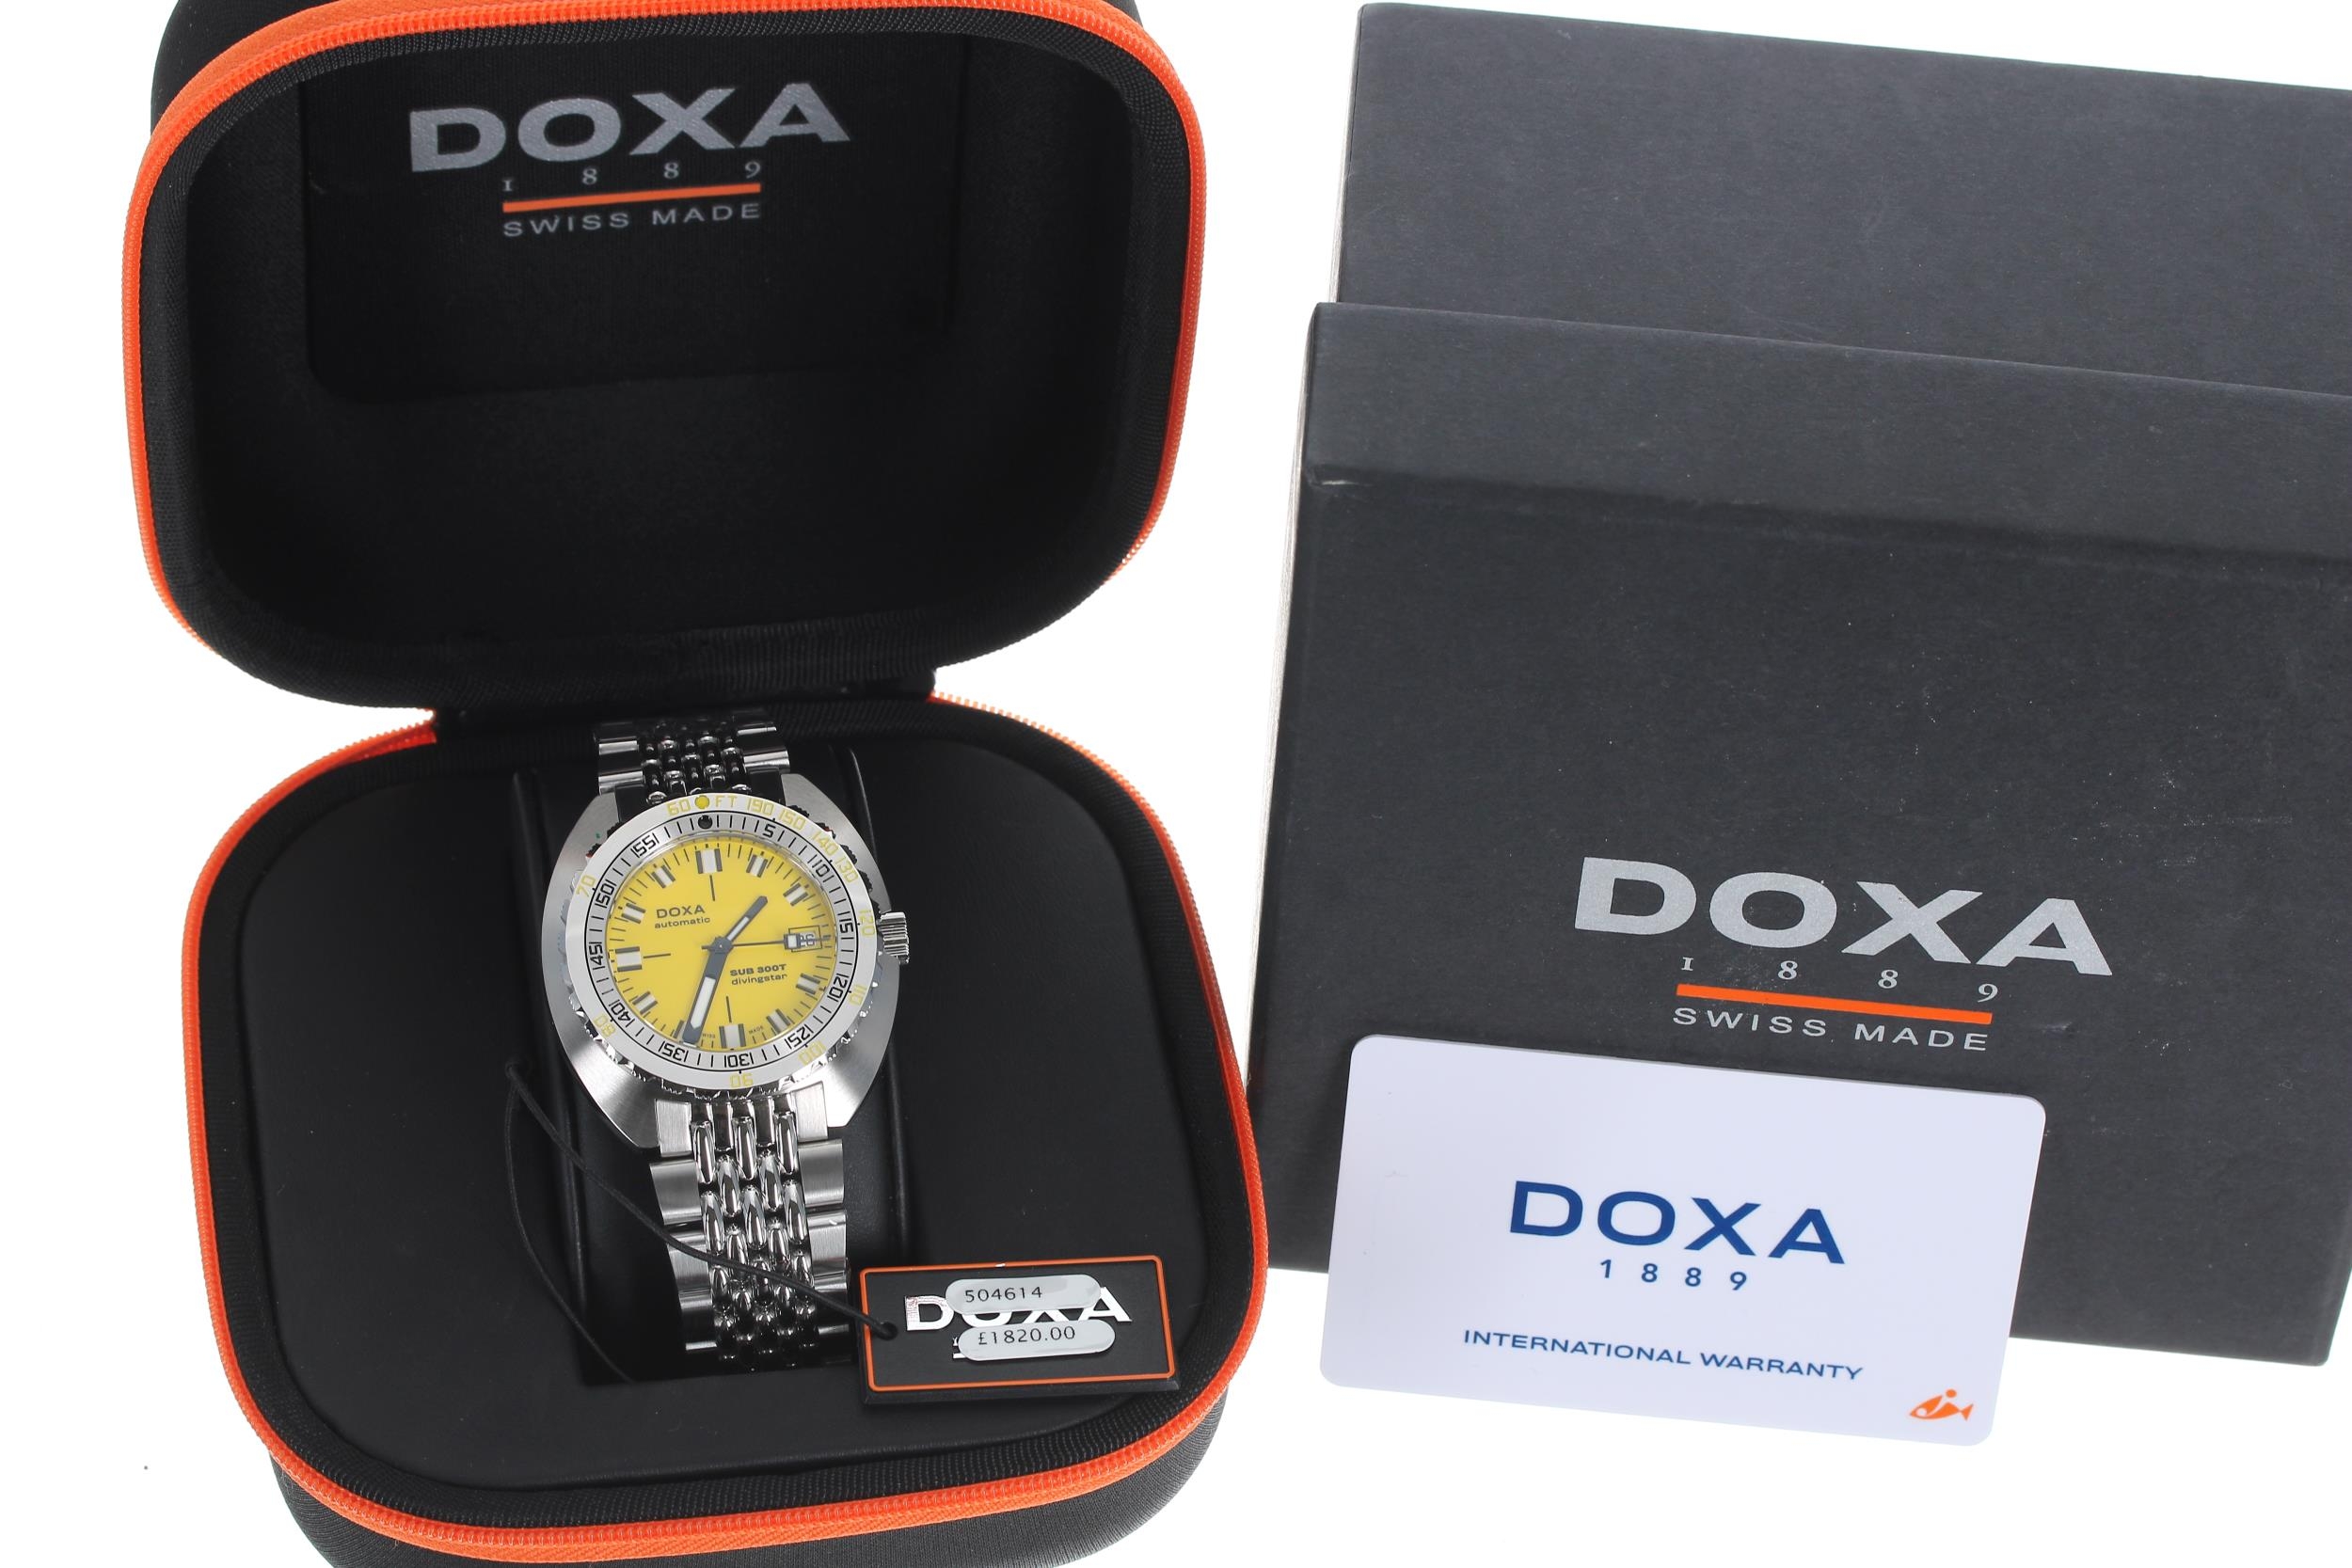 Doxa Sub 300T Divingstar automatic stainless steel diver's wristwatch, reference no. 879.10.361. - Image 2 of 3